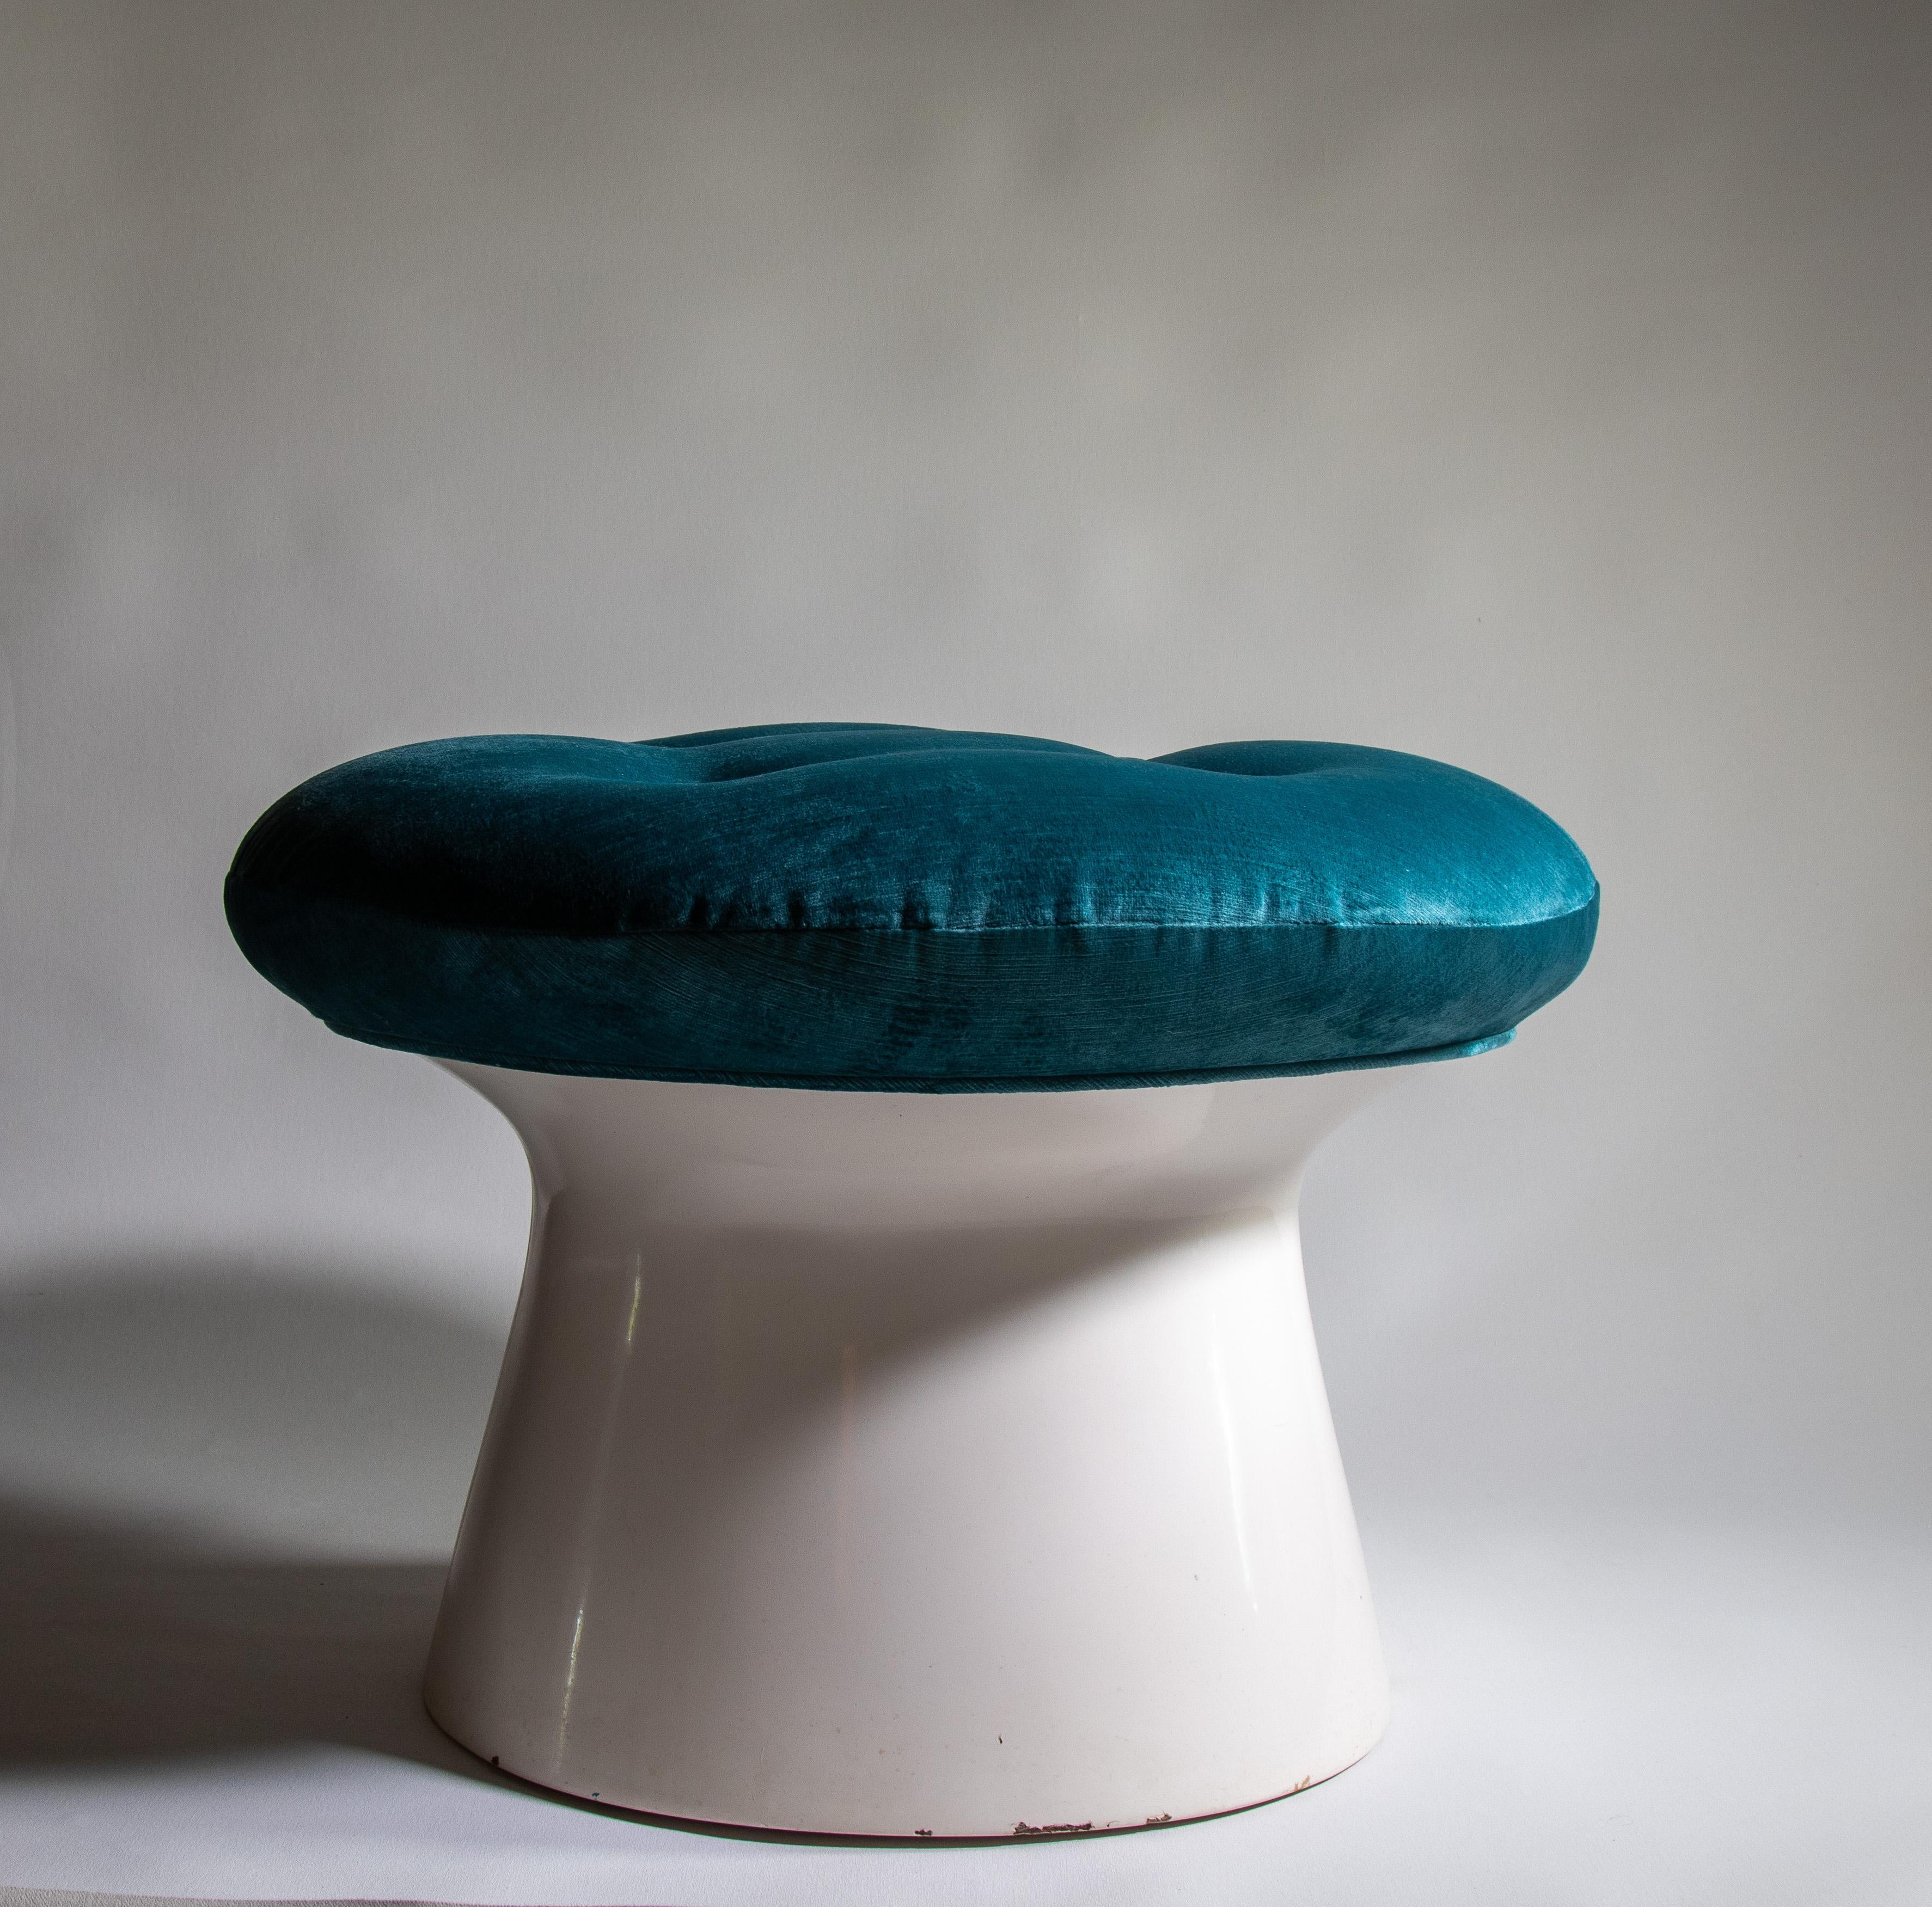 A 1960’s fiberglass ottoman in the manner of Verner Panton, Chromcraft or Michel Cadestin’s Karate Chair. A unique form that will add interest and extra seating to your interior design. 

Dimensions:

23” diameter x 16.25” height

Condition: 

New